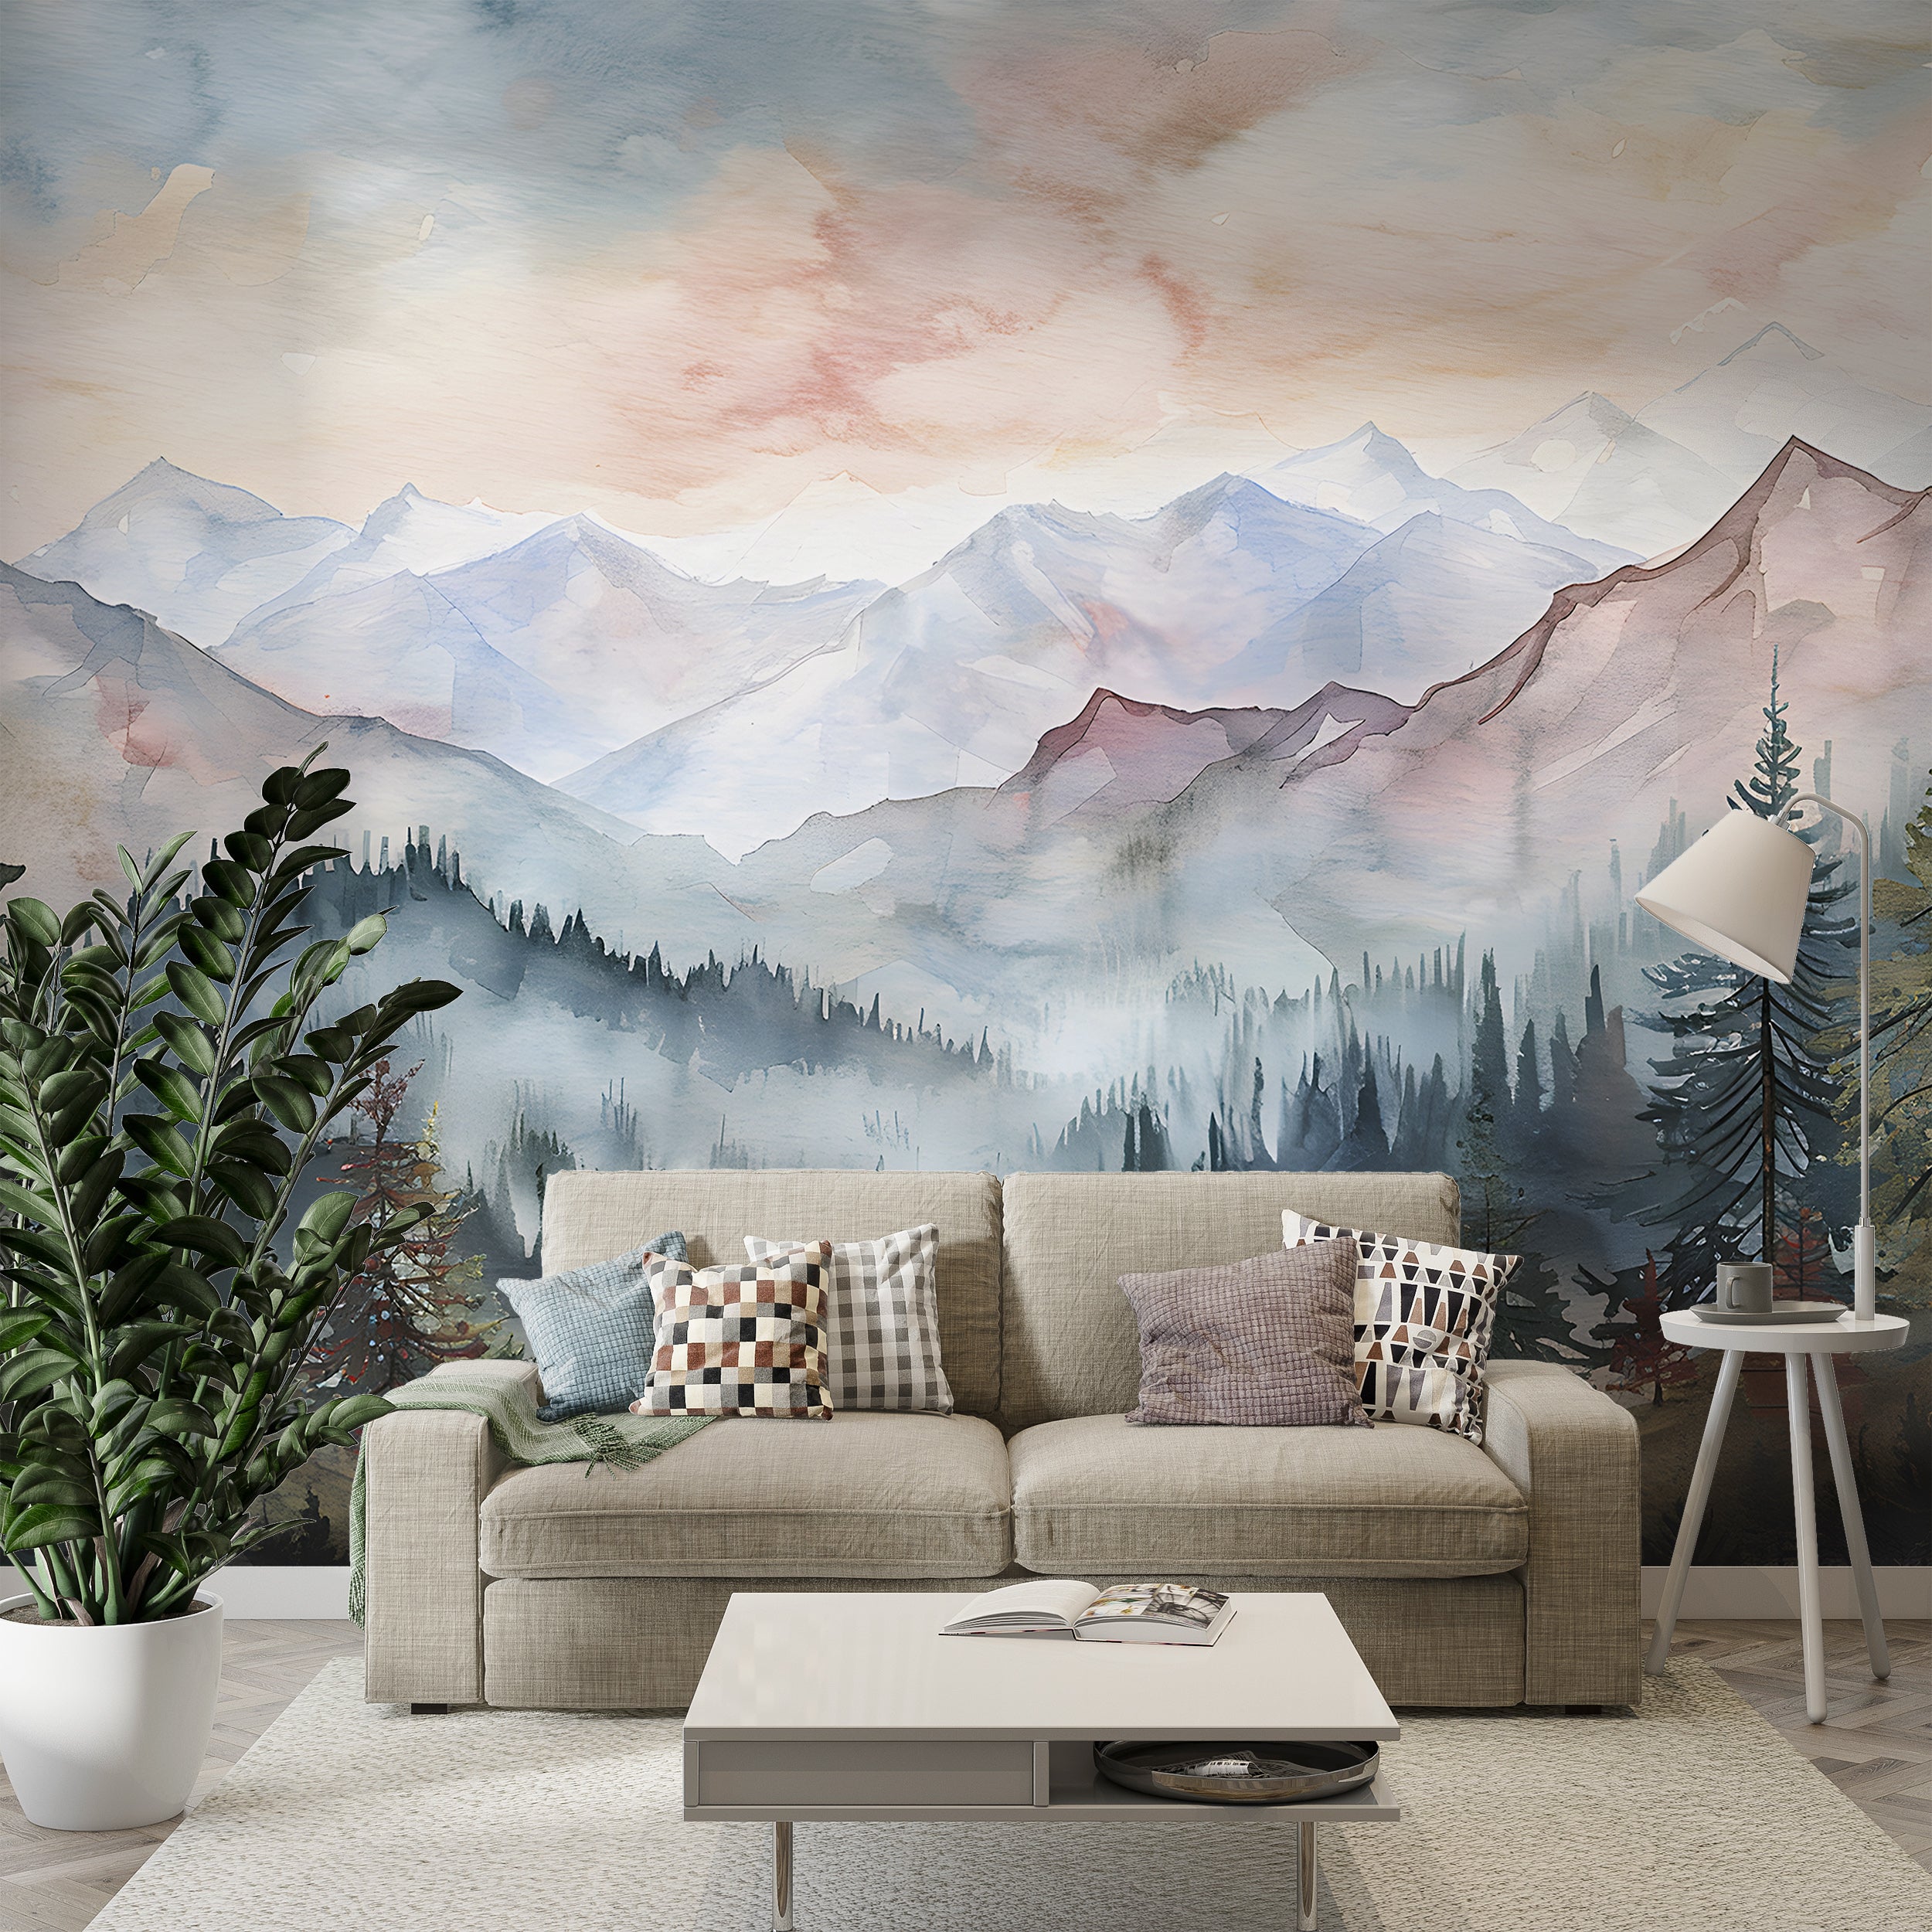 Watercolor Wild Nature Landscape Mural, Mountains and Forest Wallpaper, Peel and Stick Mountain Valley Decal, Colorful Nursery Landscape Wall Art